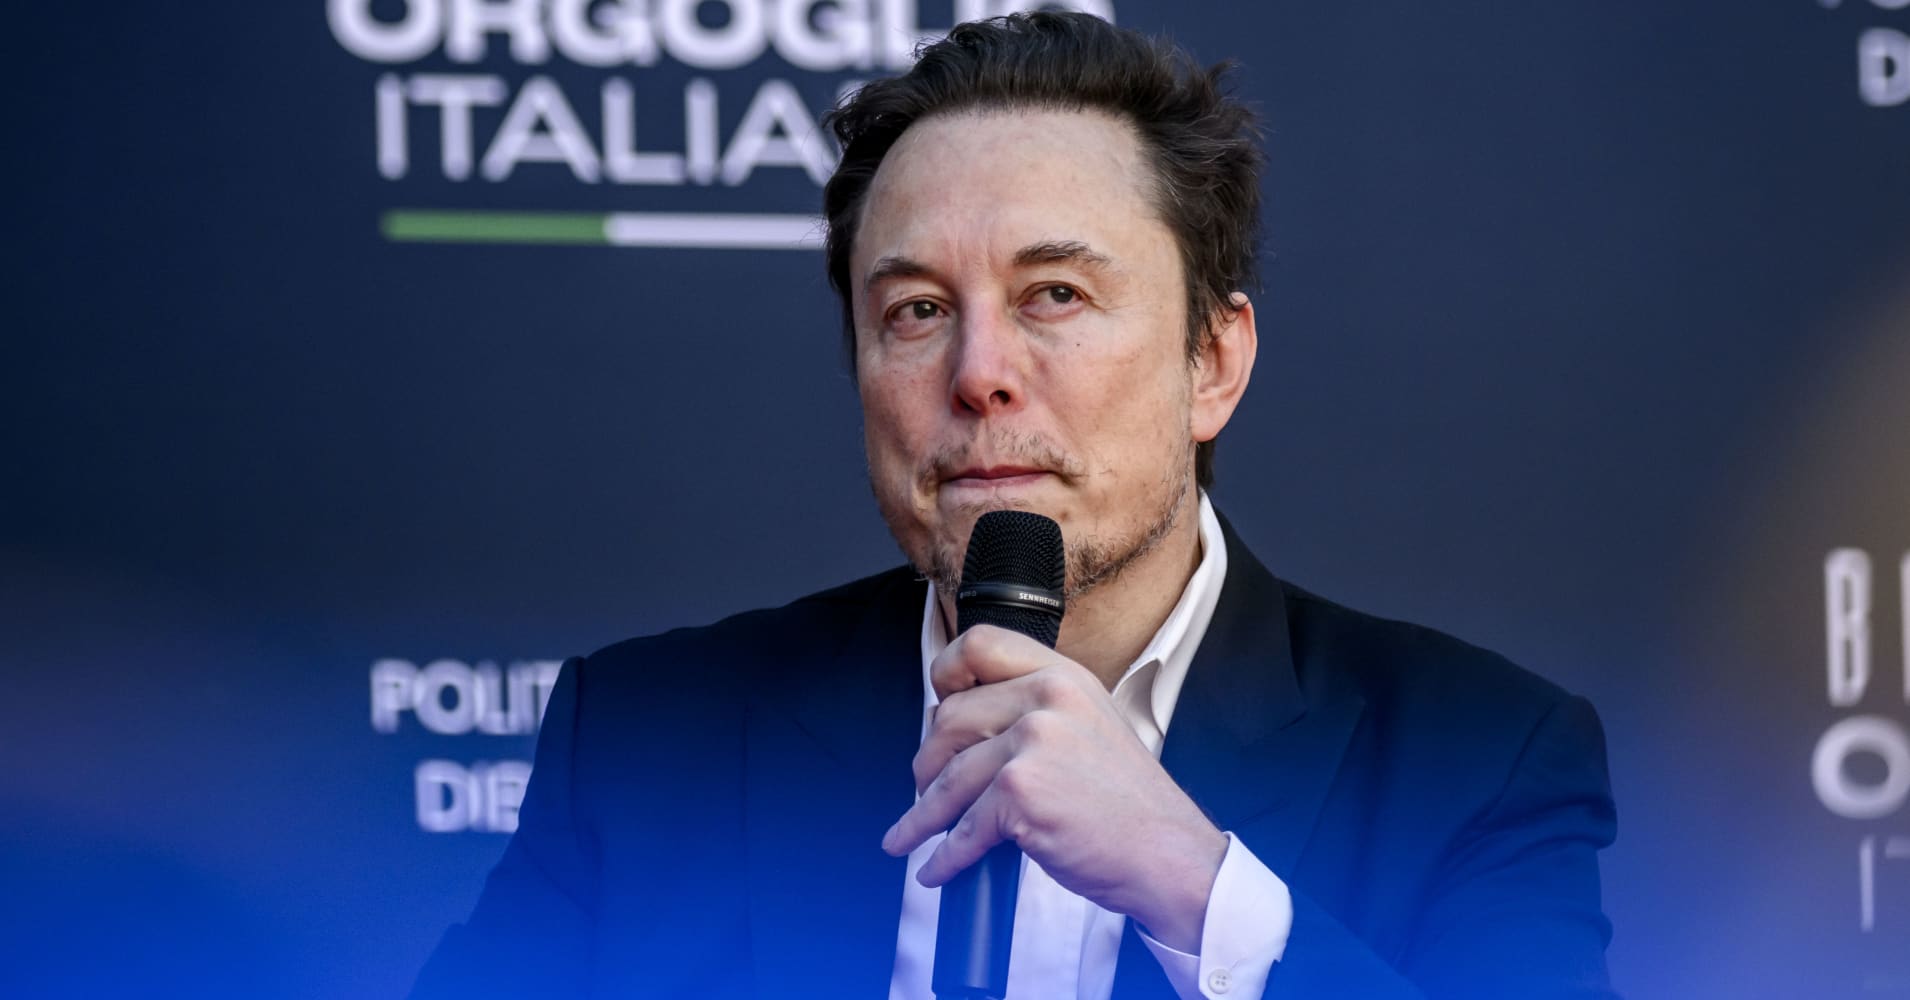 house china committee demands elon musk open spacex starshield internet to u.s. troops in taiwan